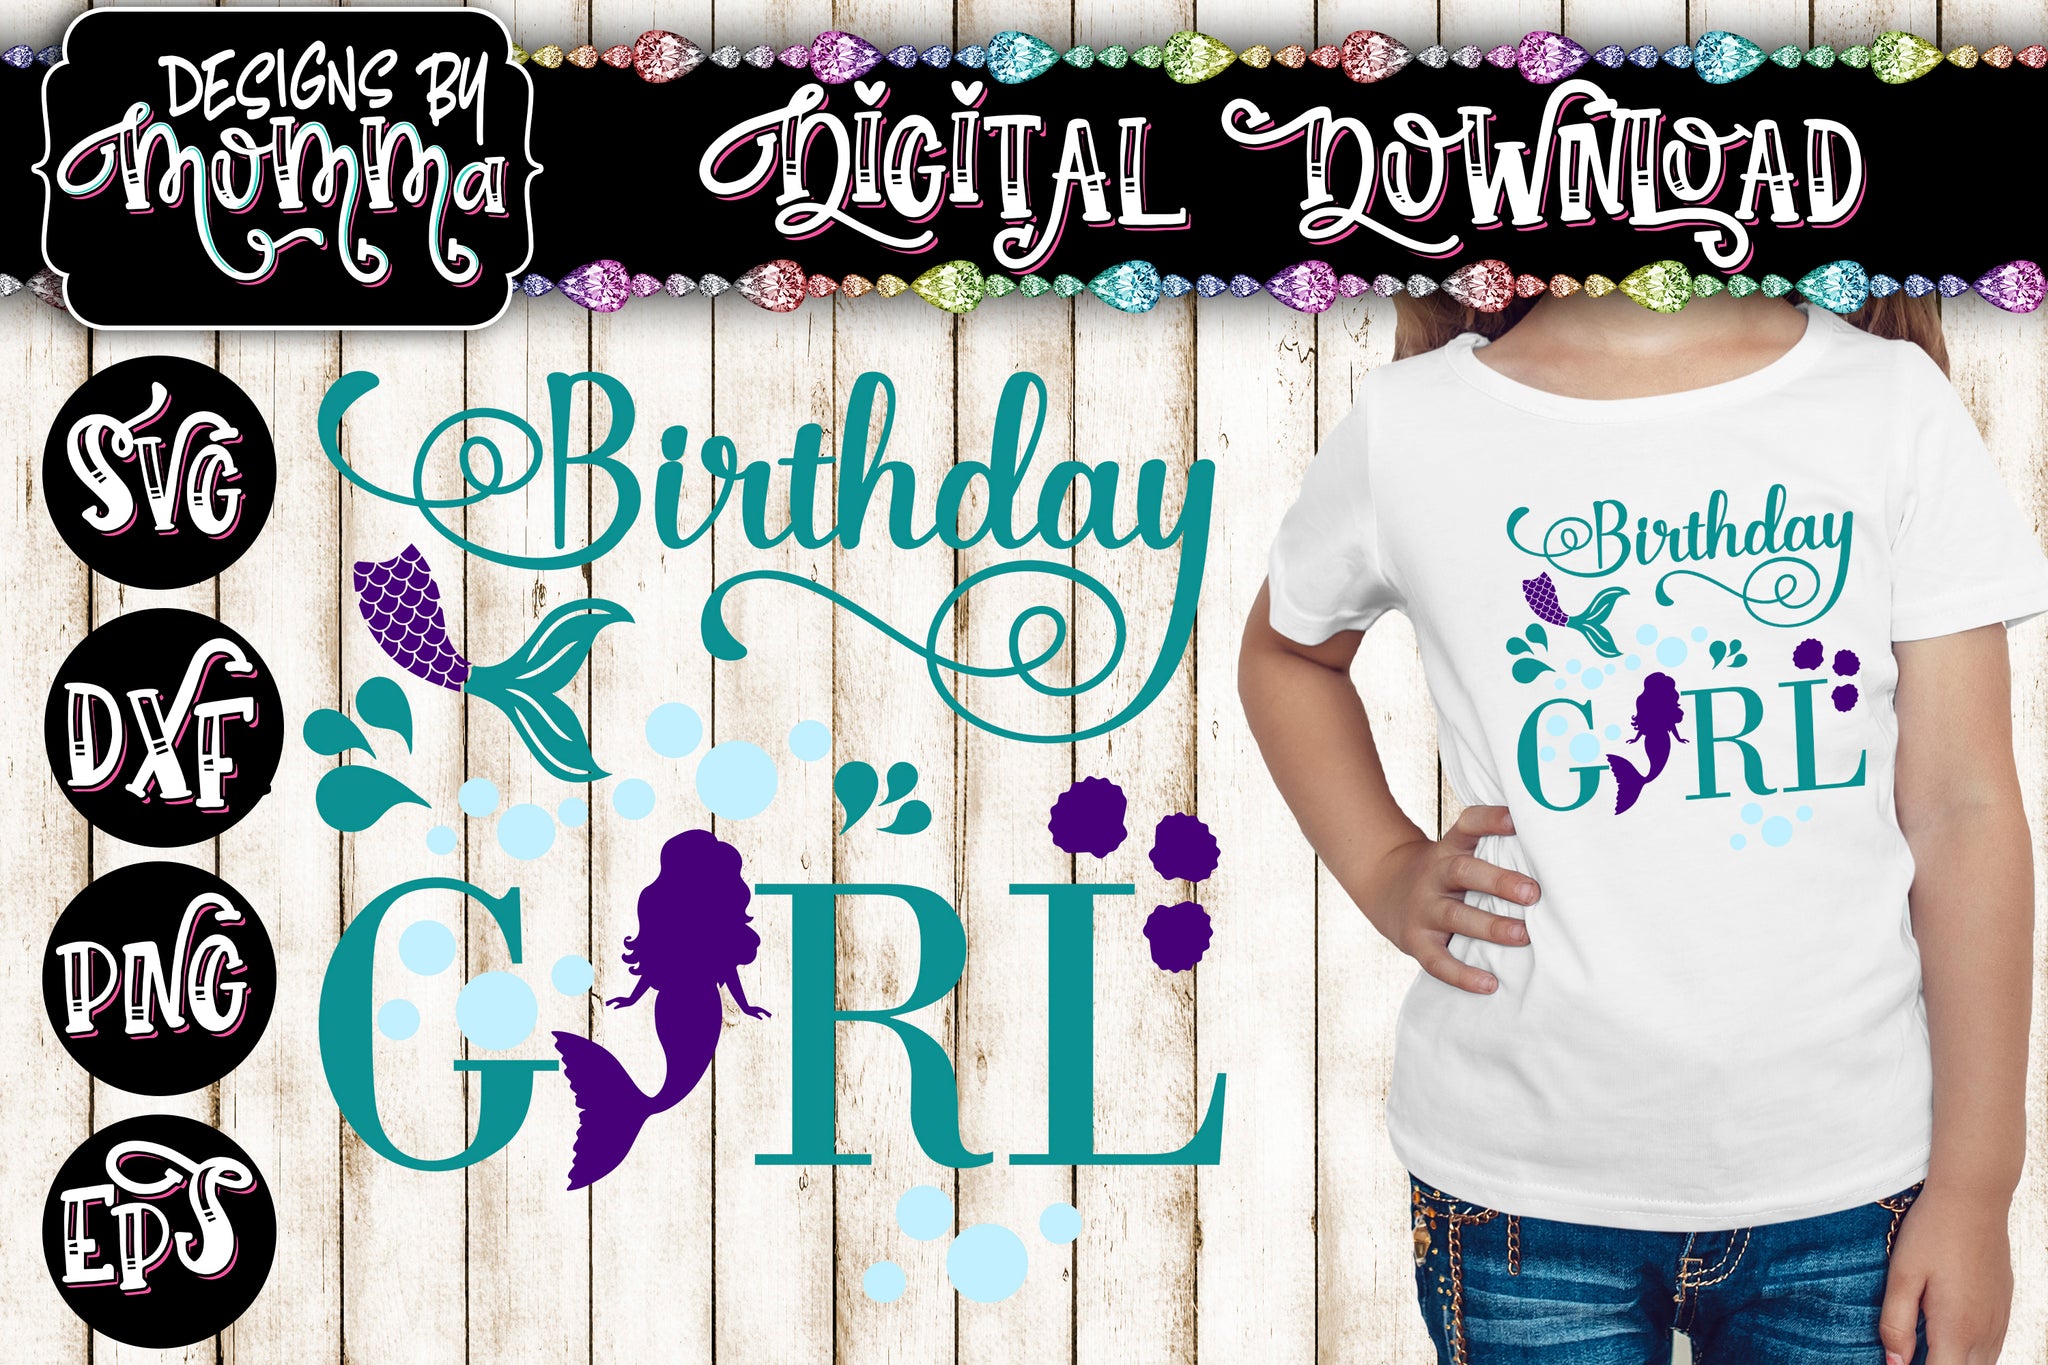 Download Birthday Girl Mermaid Family Volume 1 SVG DXF EPS PNG - Designs by Momma